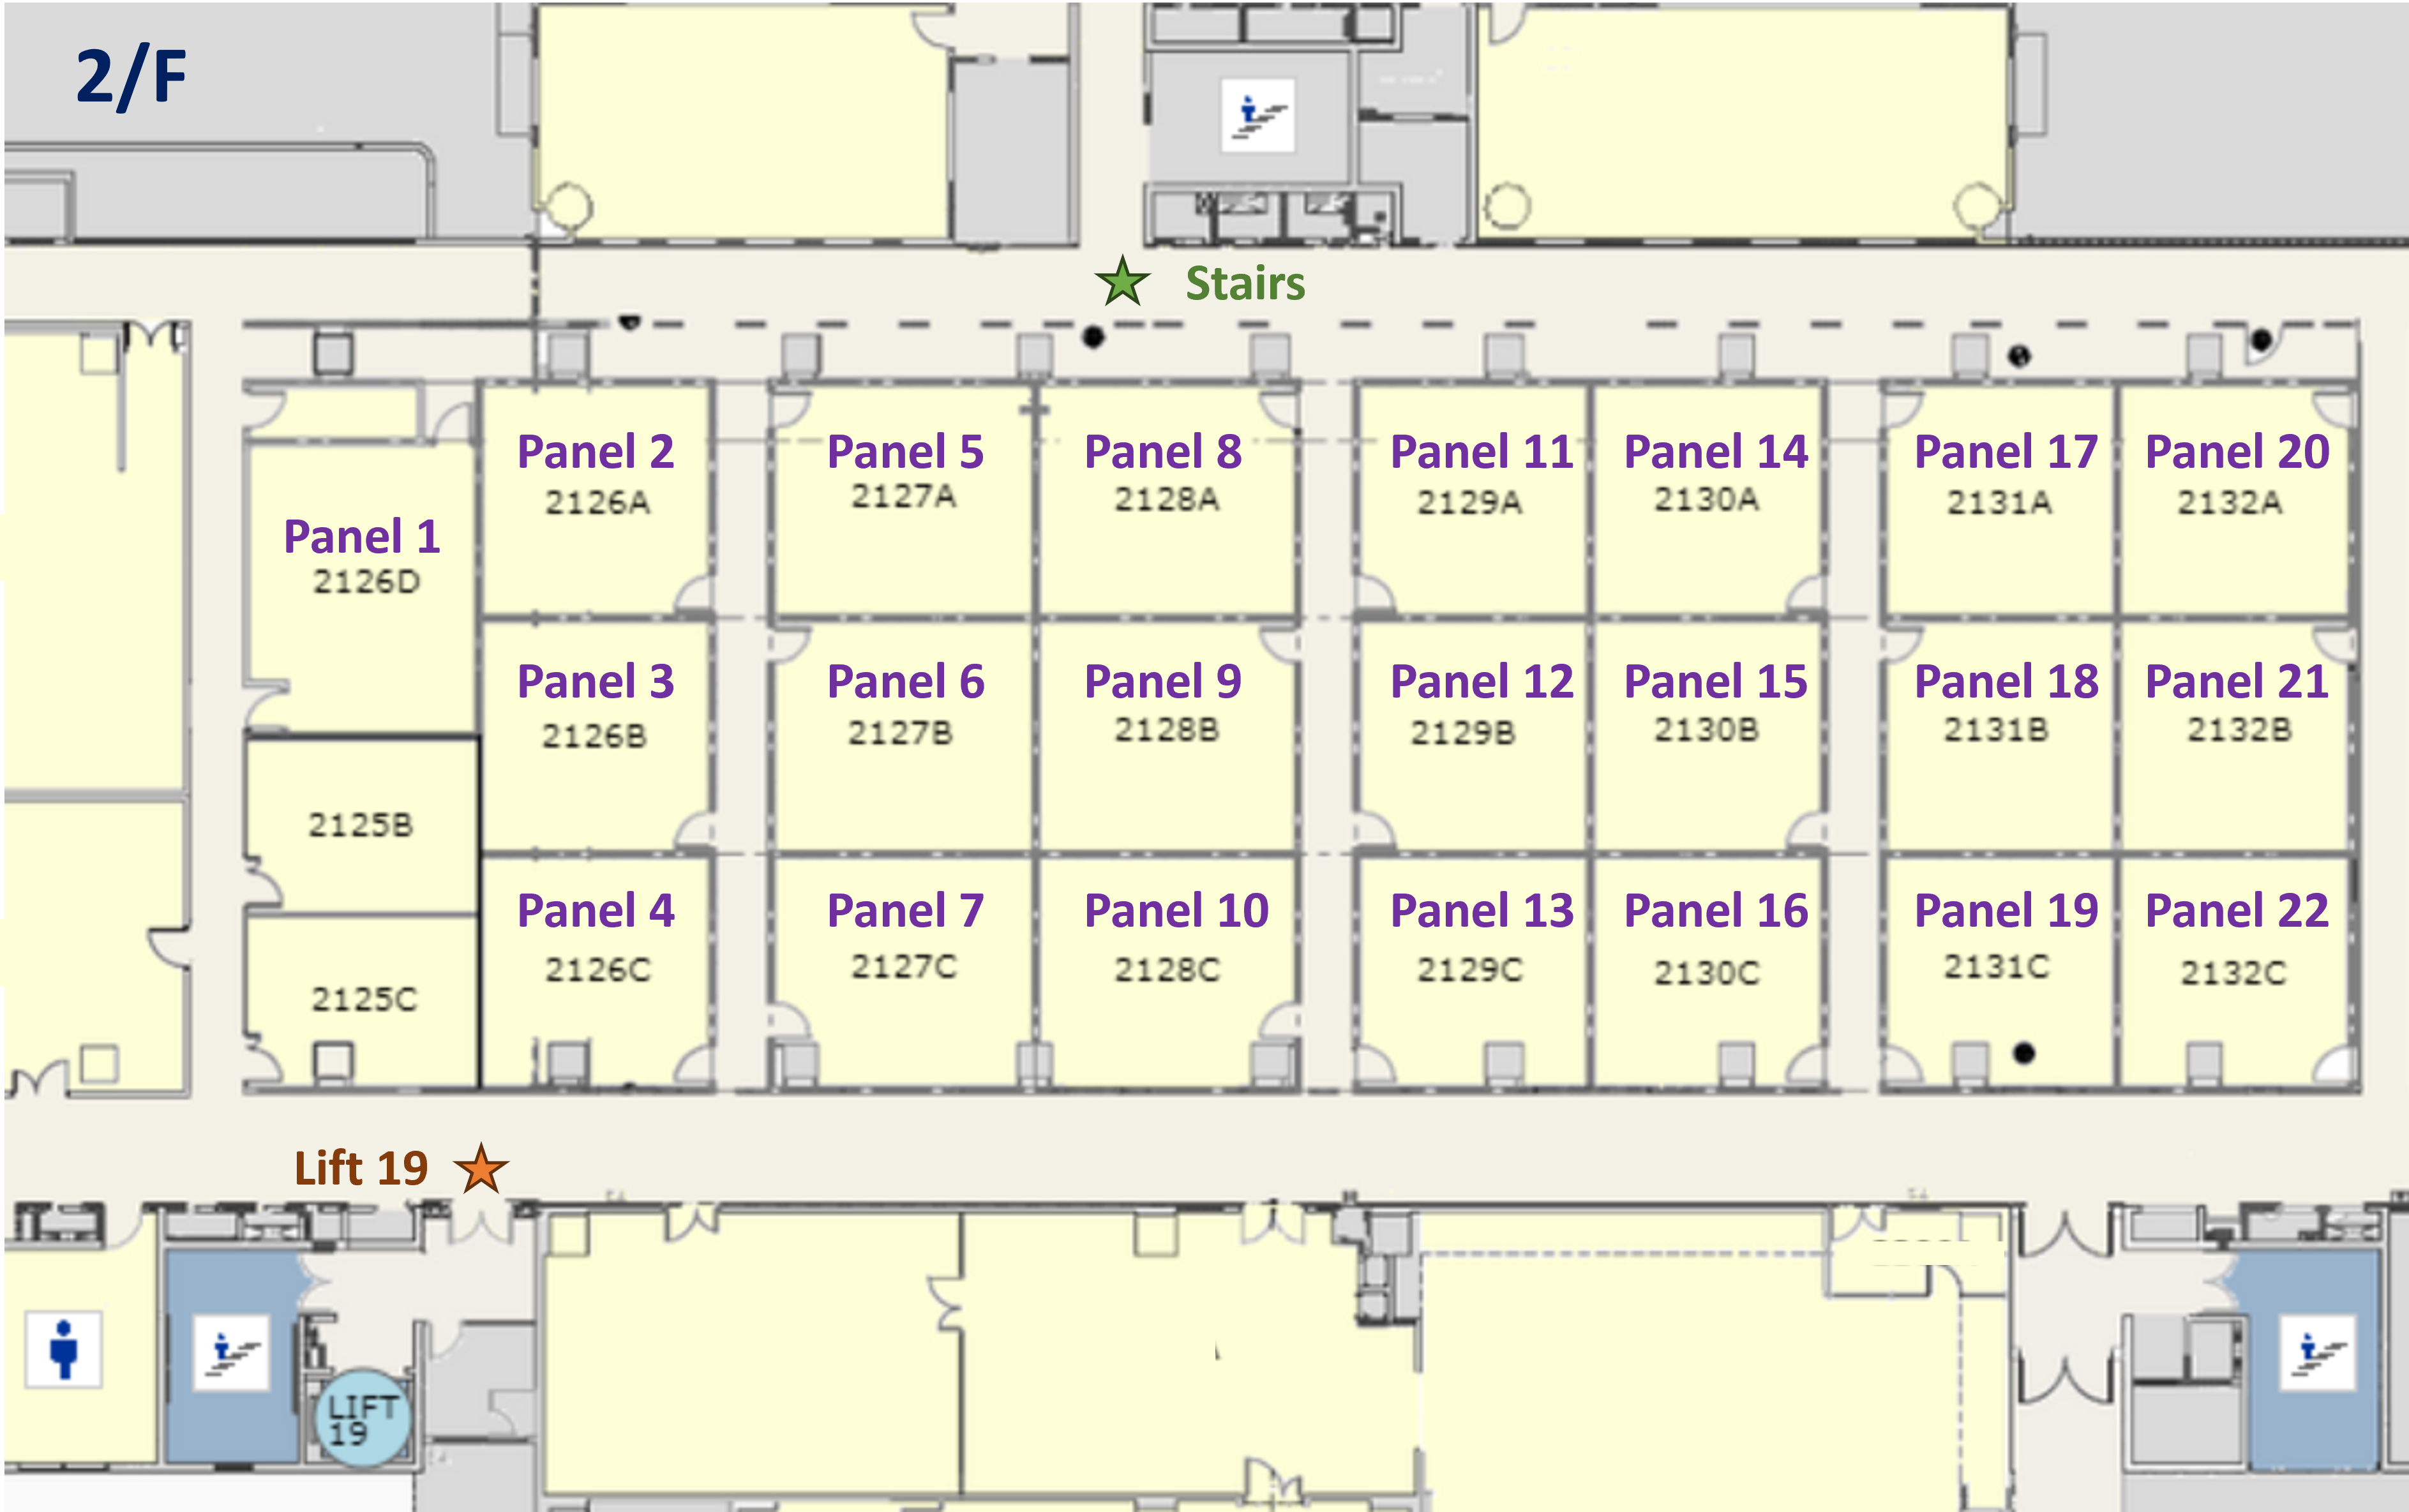 2/F - Parallel Sessions (Rooms 2126A – 2132C)